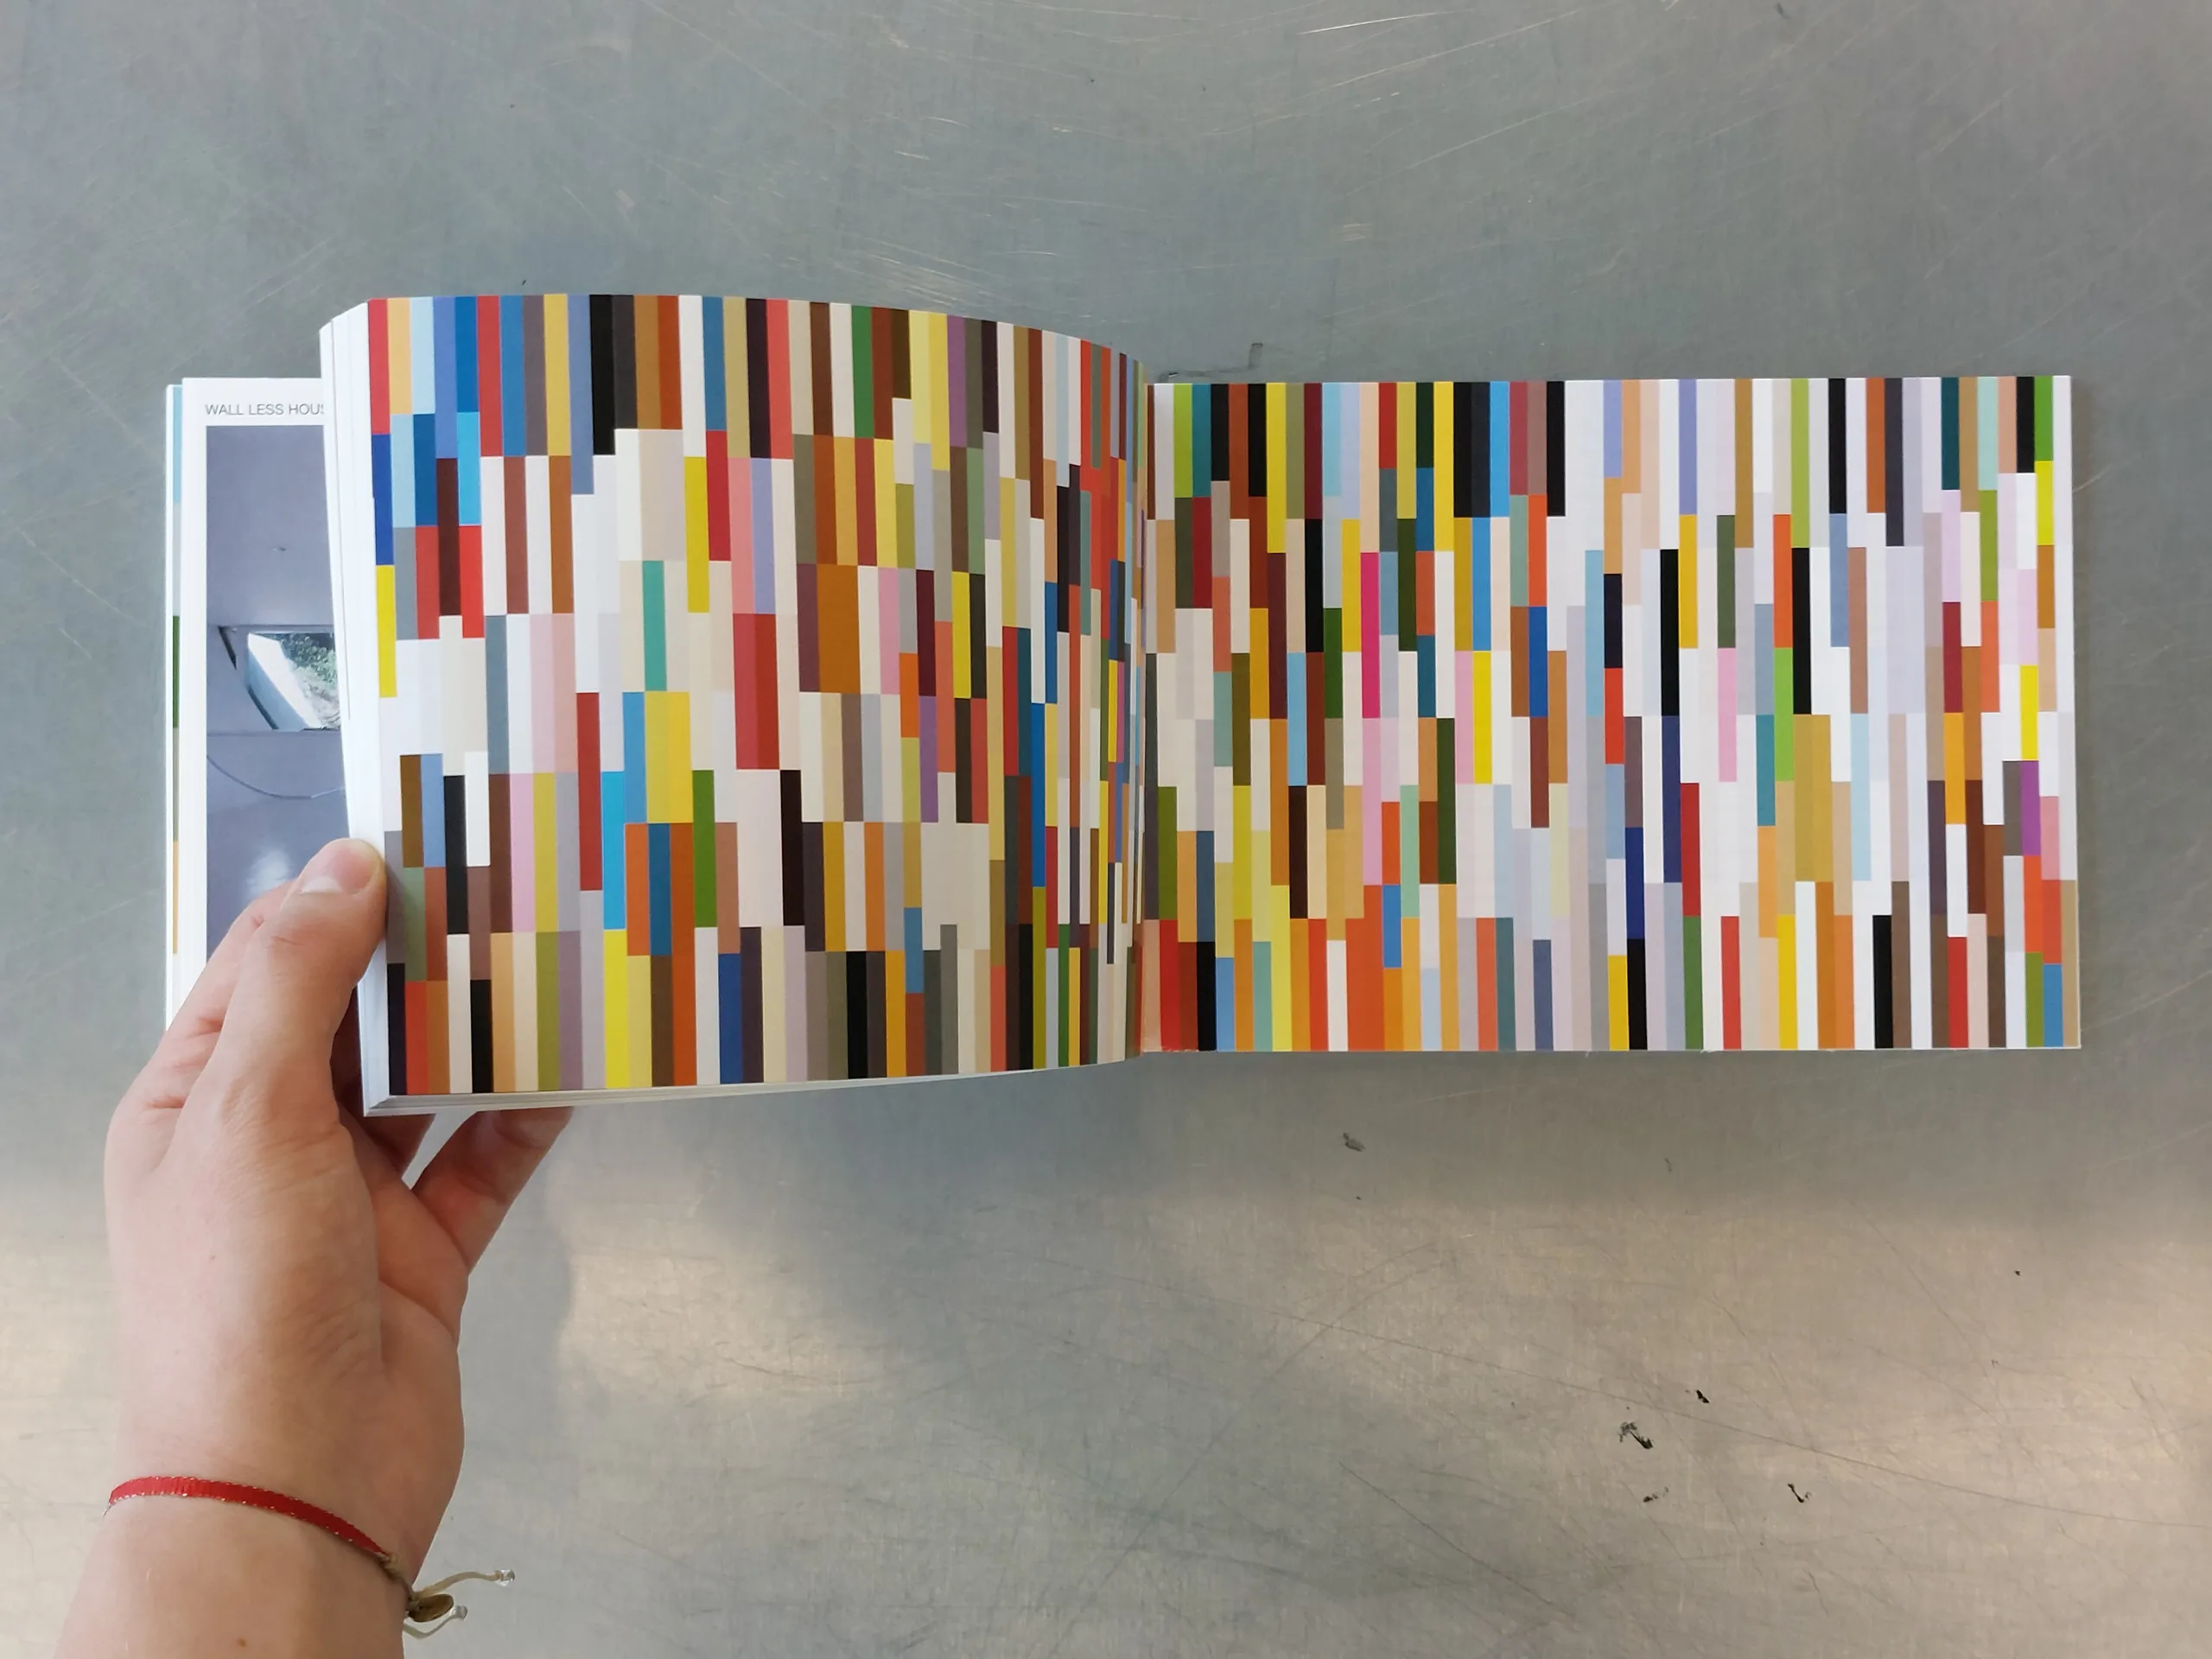 image of the 100 years of colour in interiors project